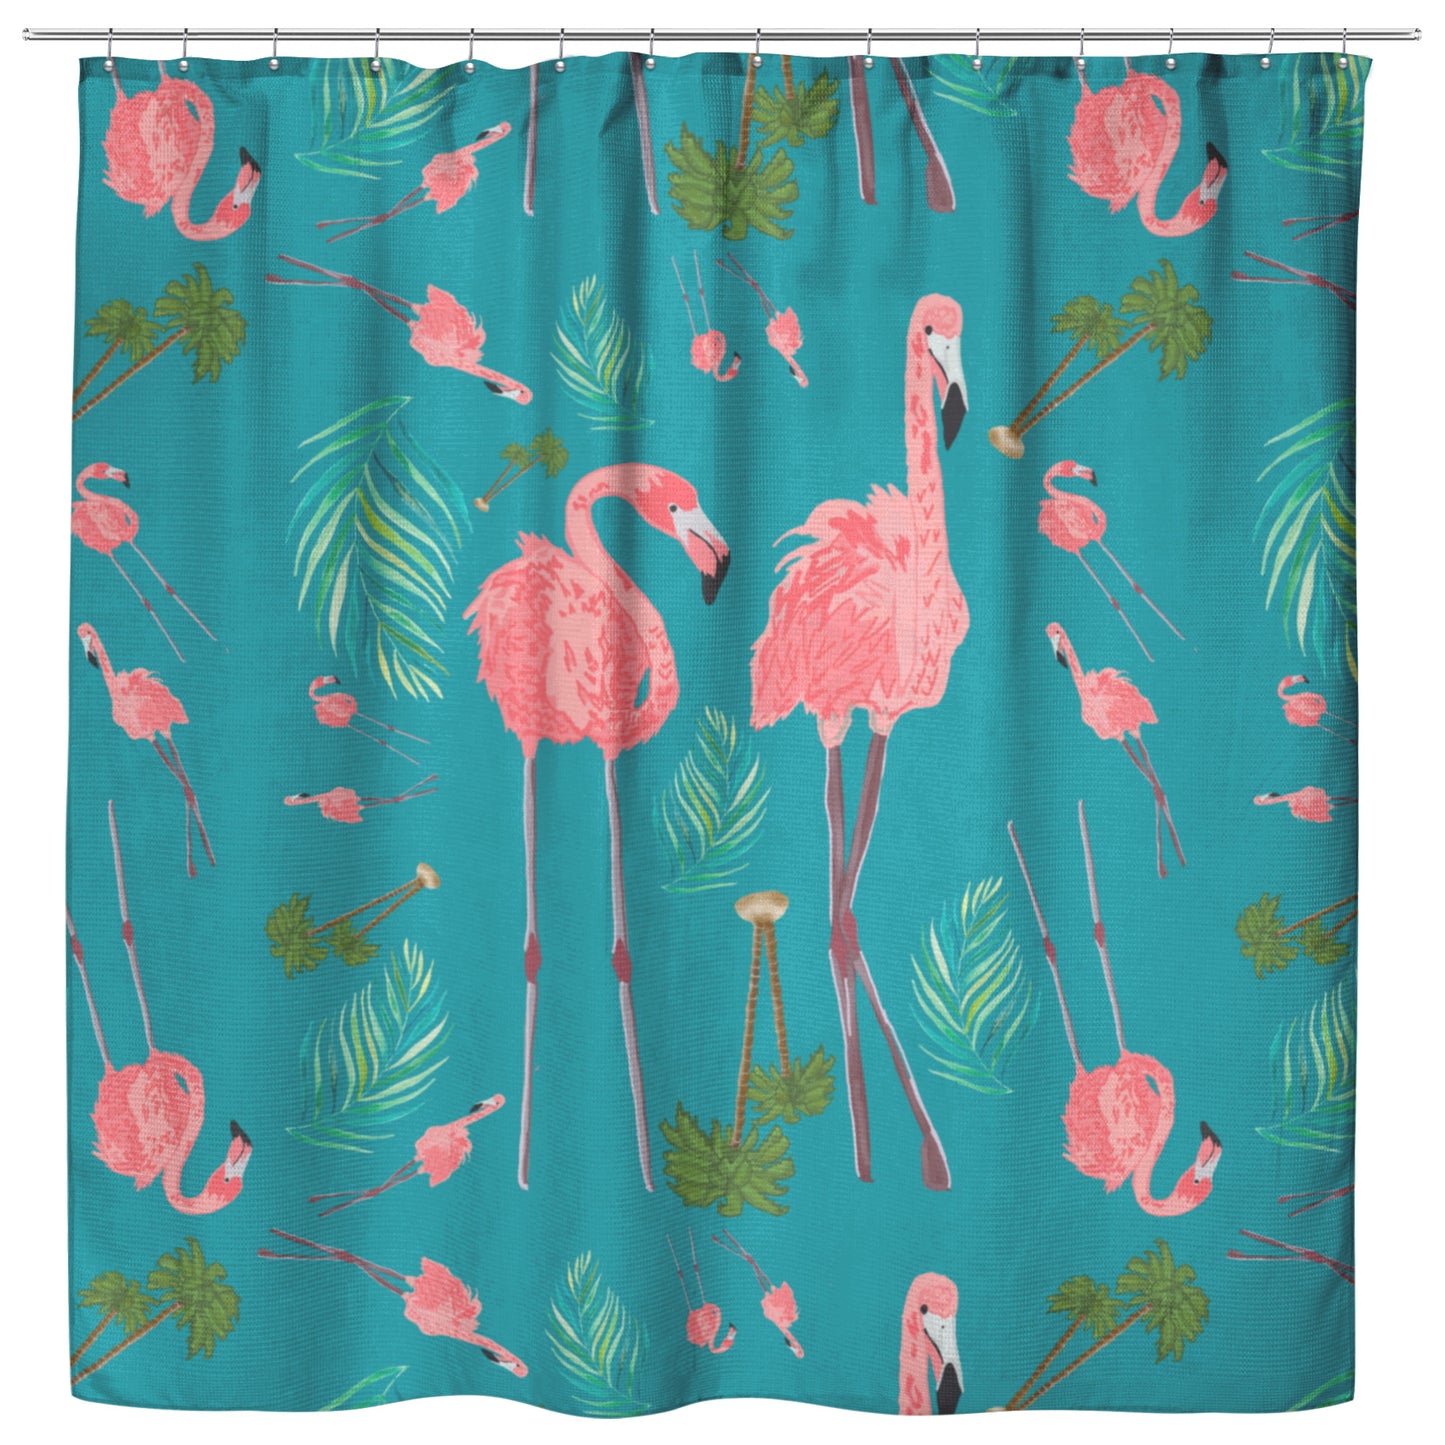 Flamingos Party on Teal Background, Shower Curtain